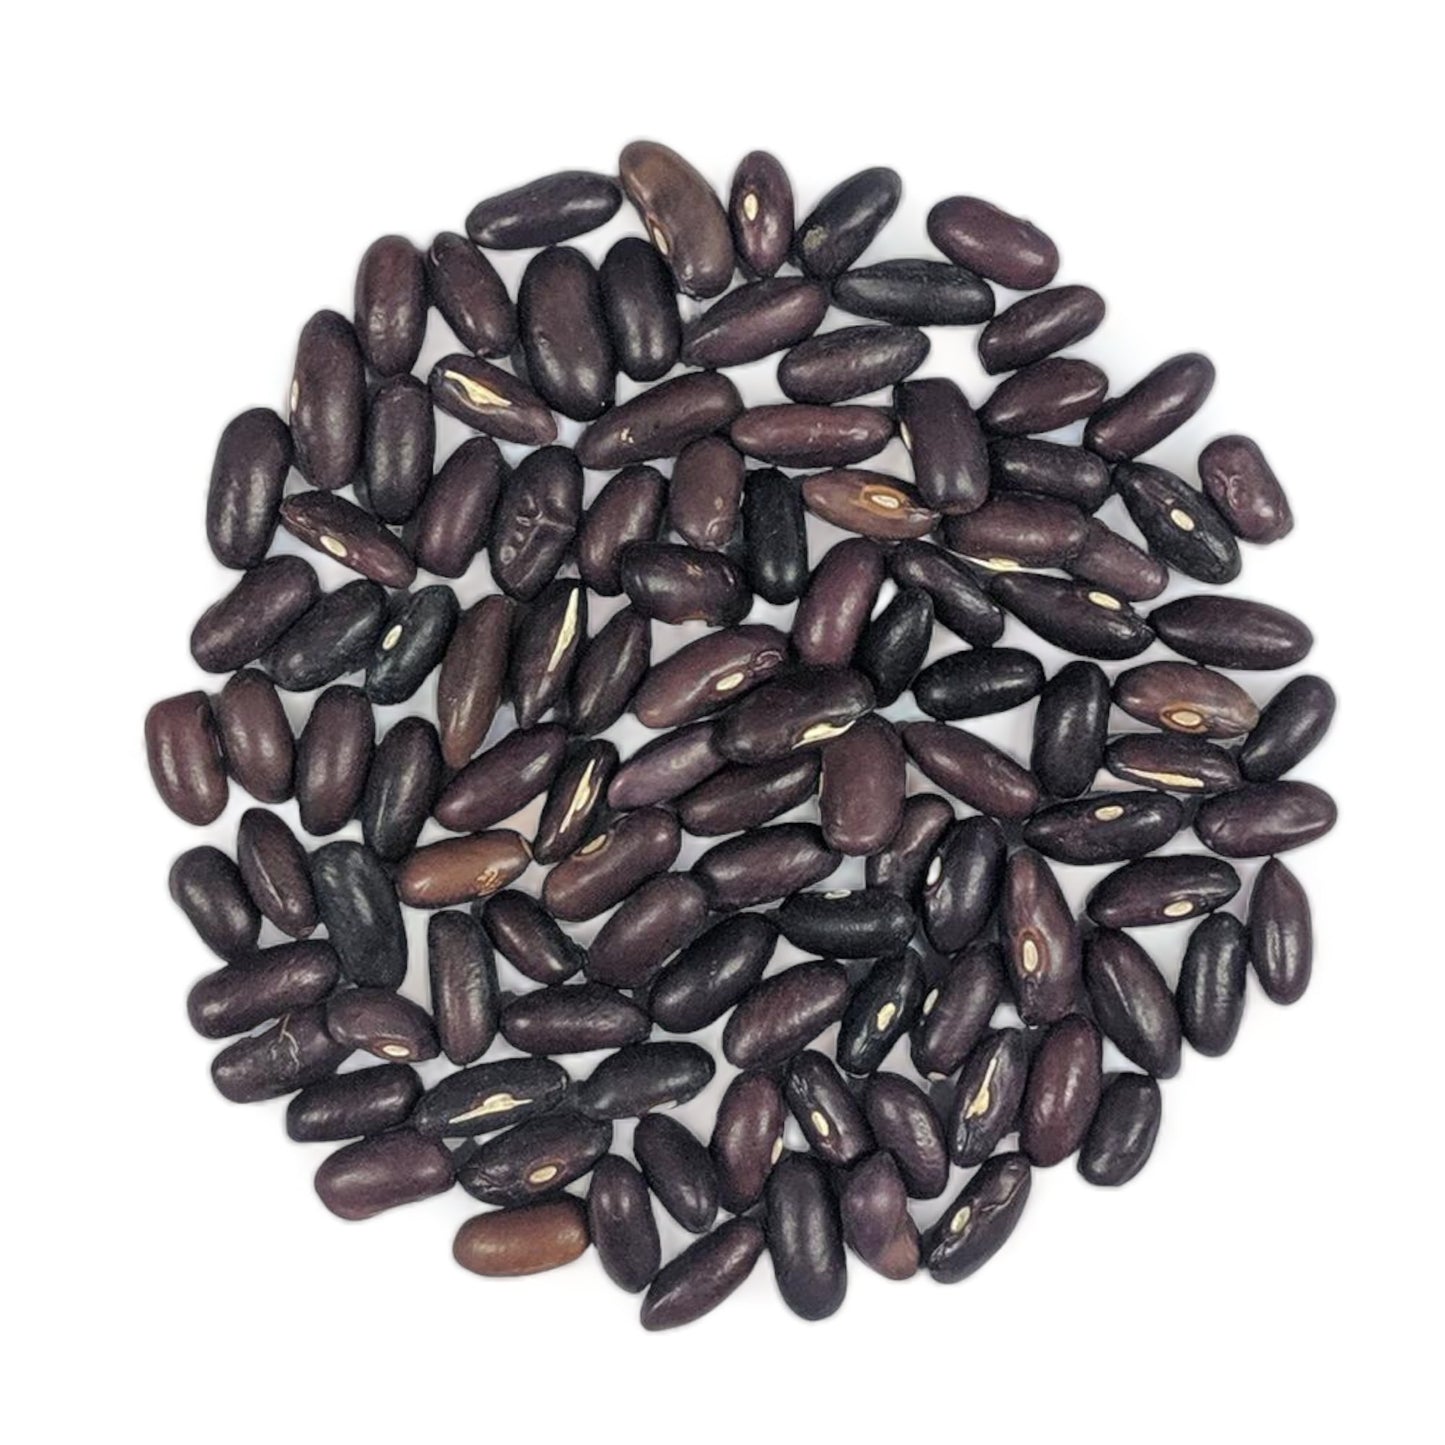 Heirloom Provider bean seeds displayed in a circular pattern